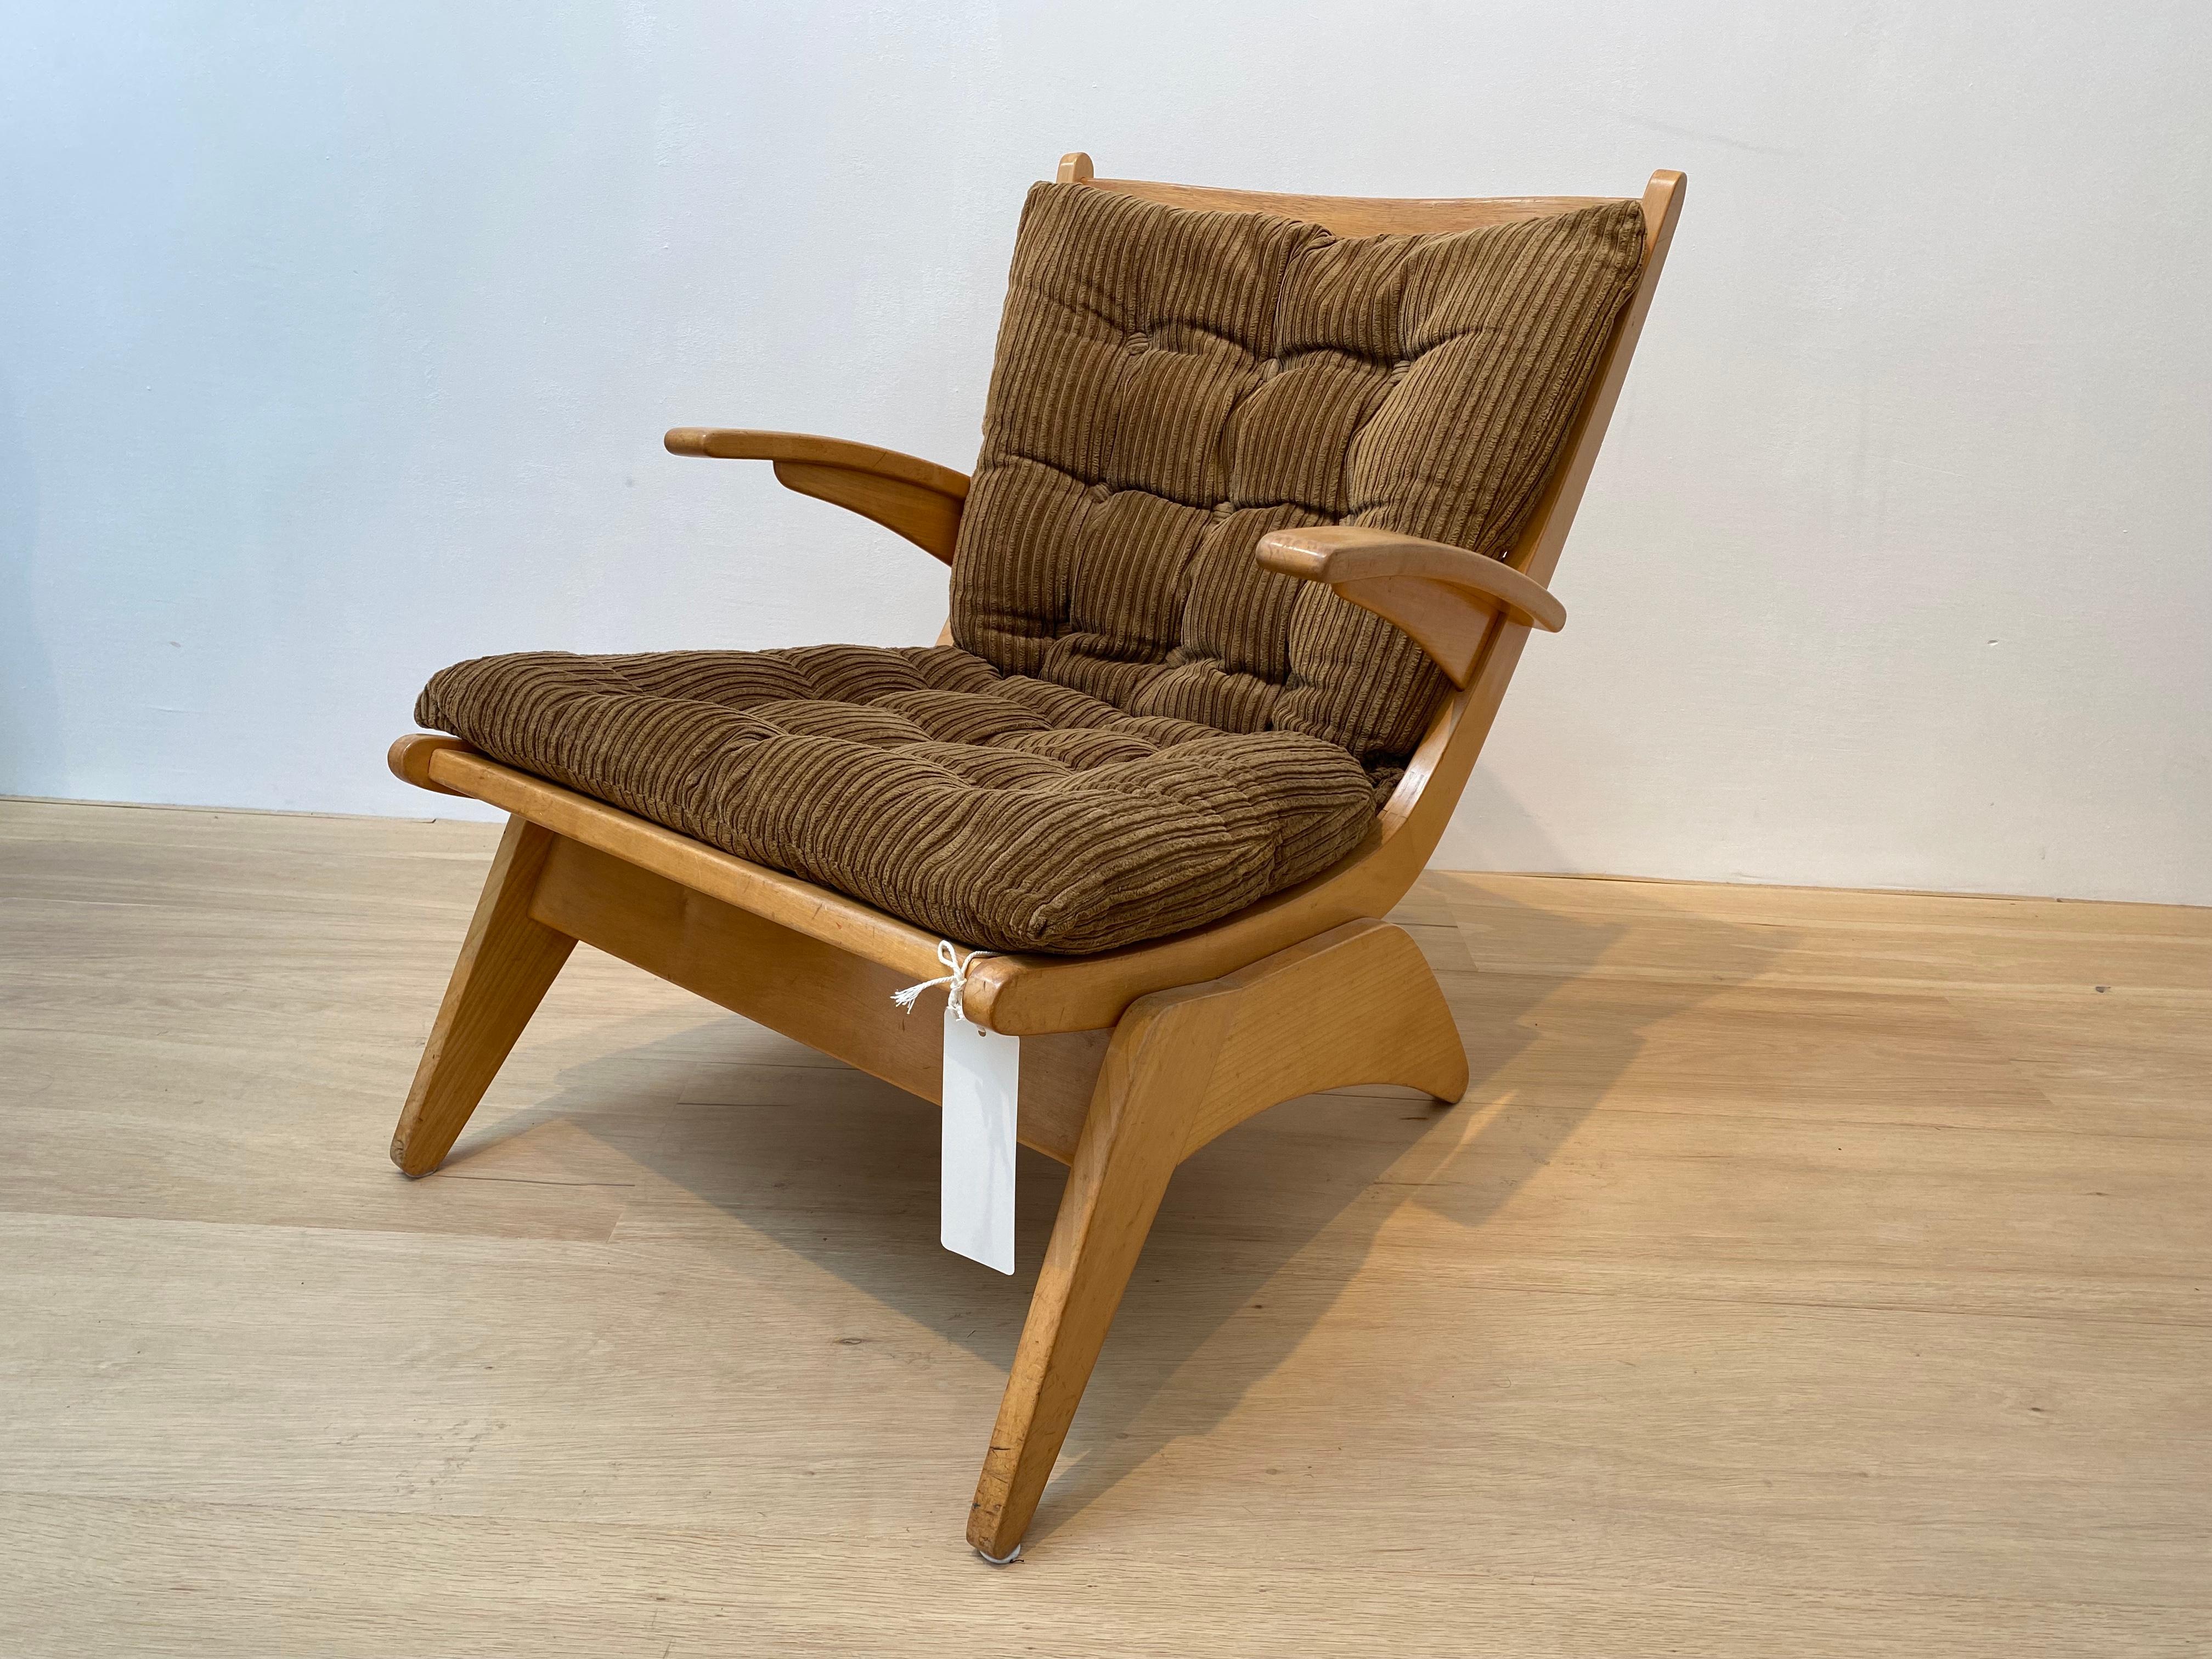 This armchair is an early and rare piece representing Dutch Modernism. Slanting, oblique lines characterize the frame, which gives this chair a distinctive shape.

Dutch mid-century furniture, such as this model, is defined by characteristics of